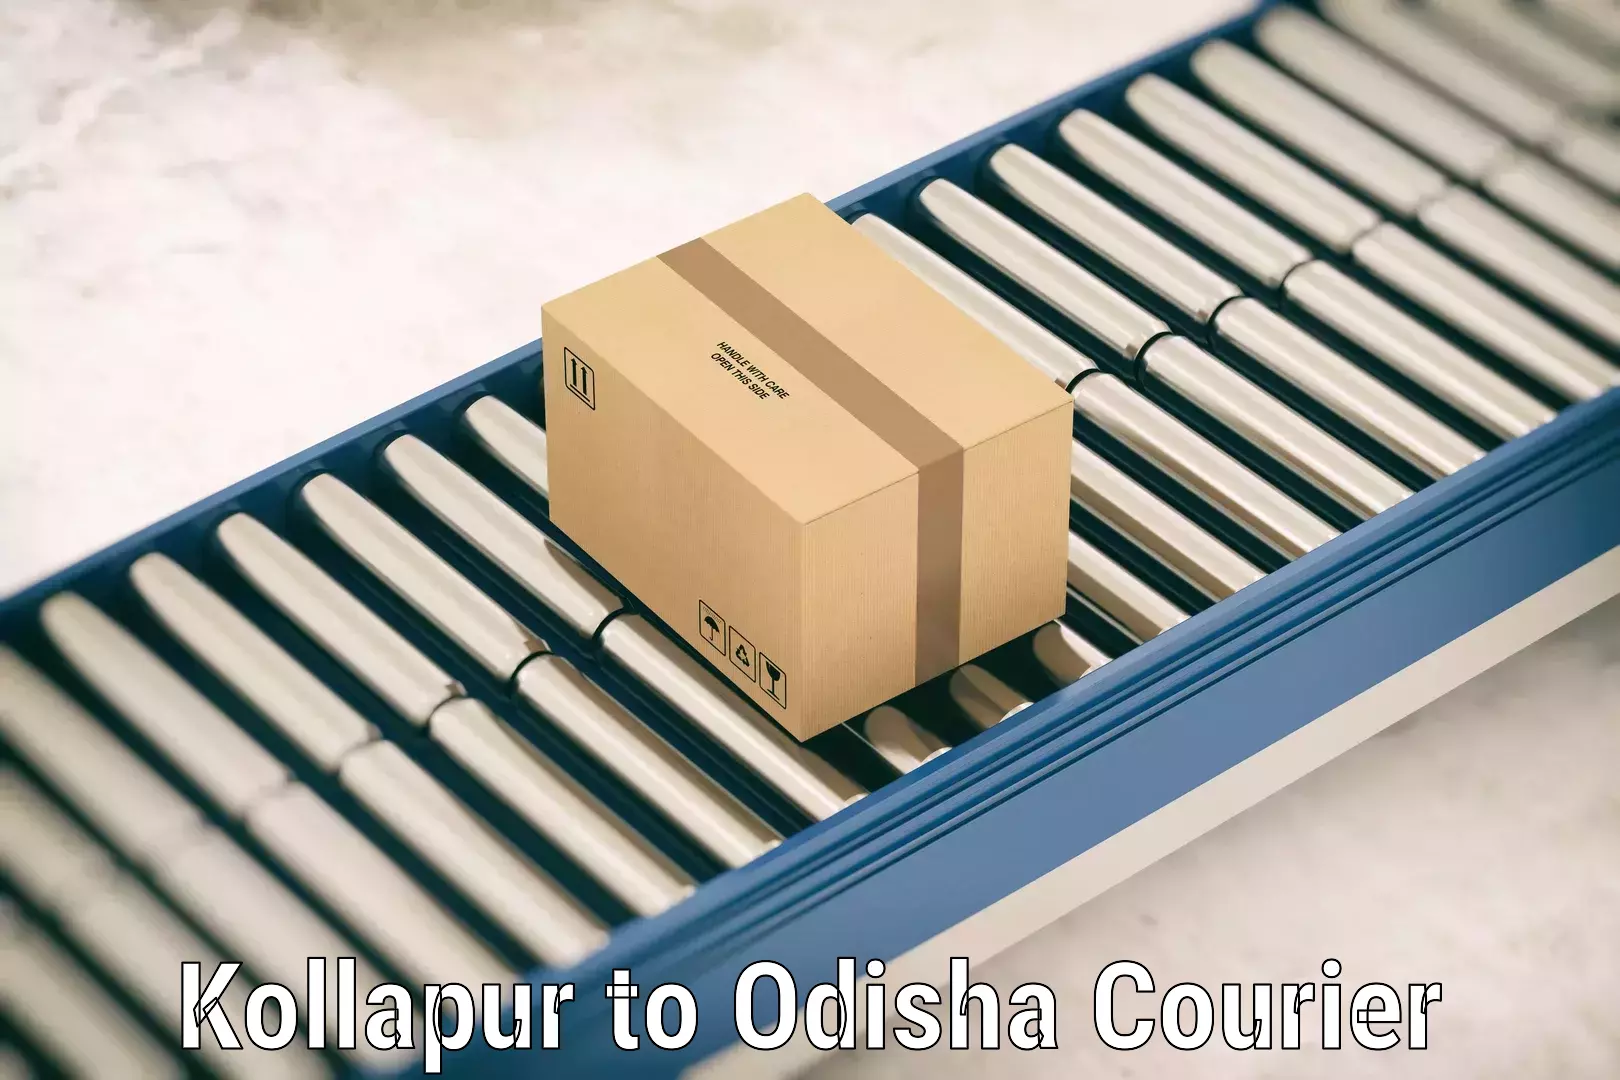 Luggage delivery system Kollapur to Asika